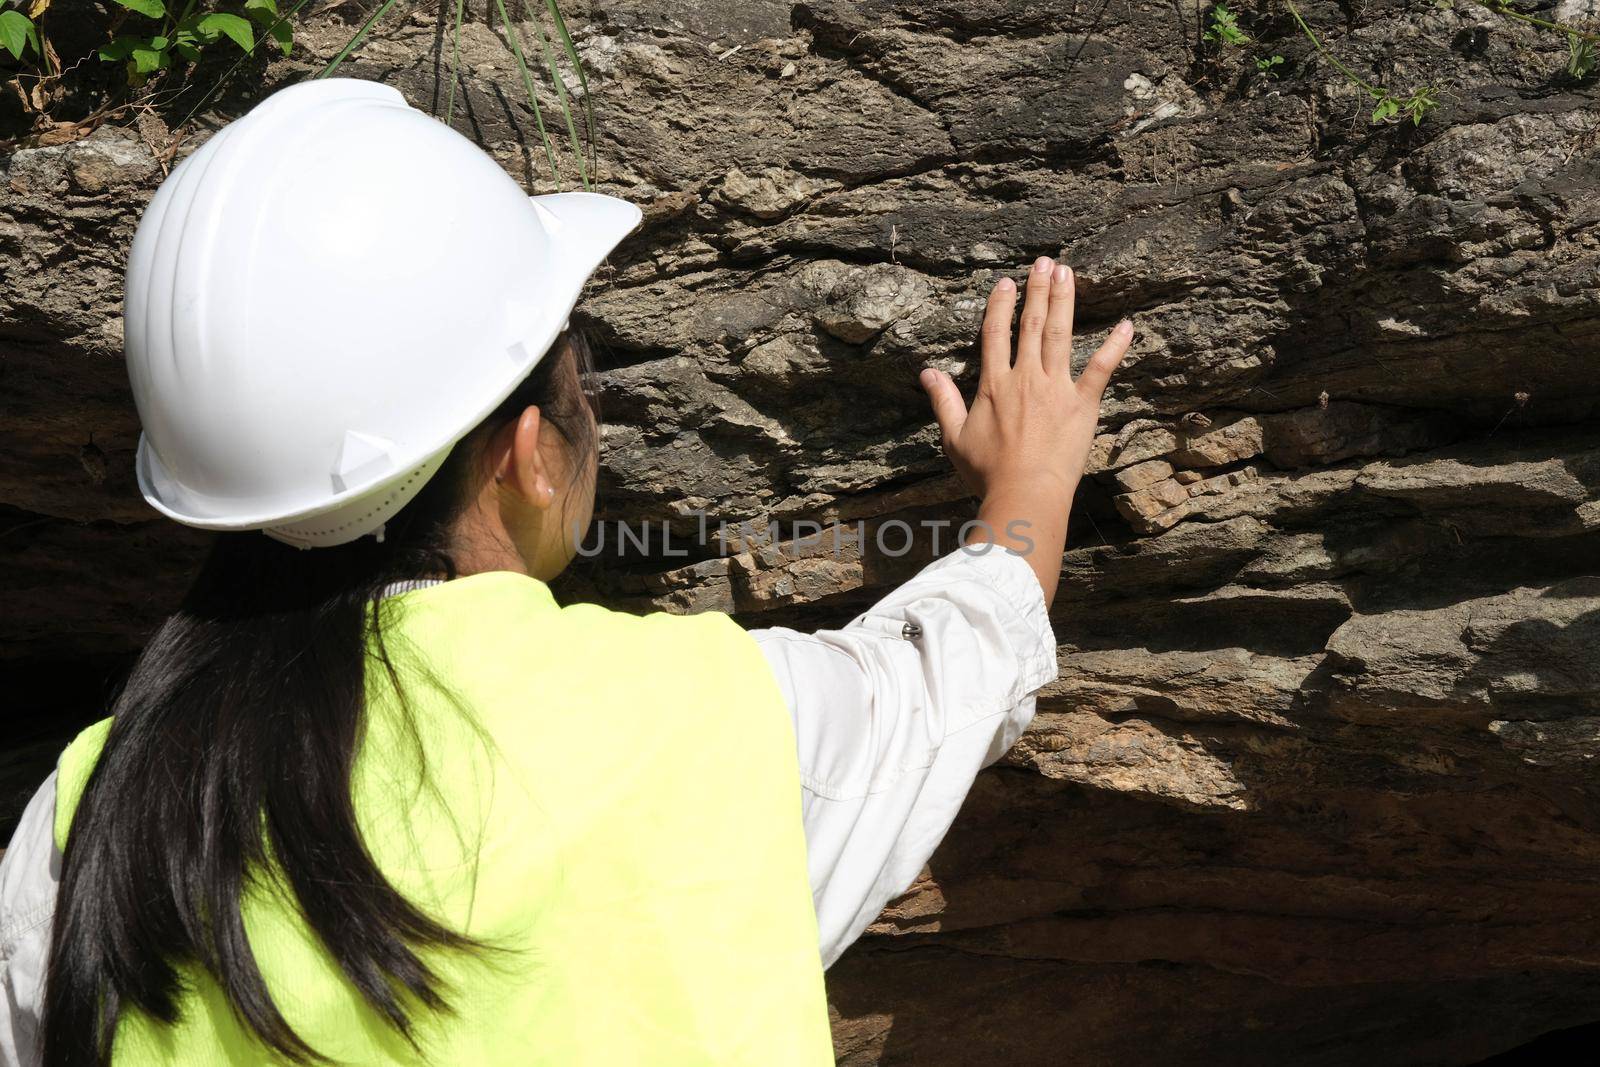 Asian female geologist researcher touches rocks with her hands to analyze surfaces in a natural park. Exploration Geologist in the Field. Stone and ecology concept. by TEERASAK